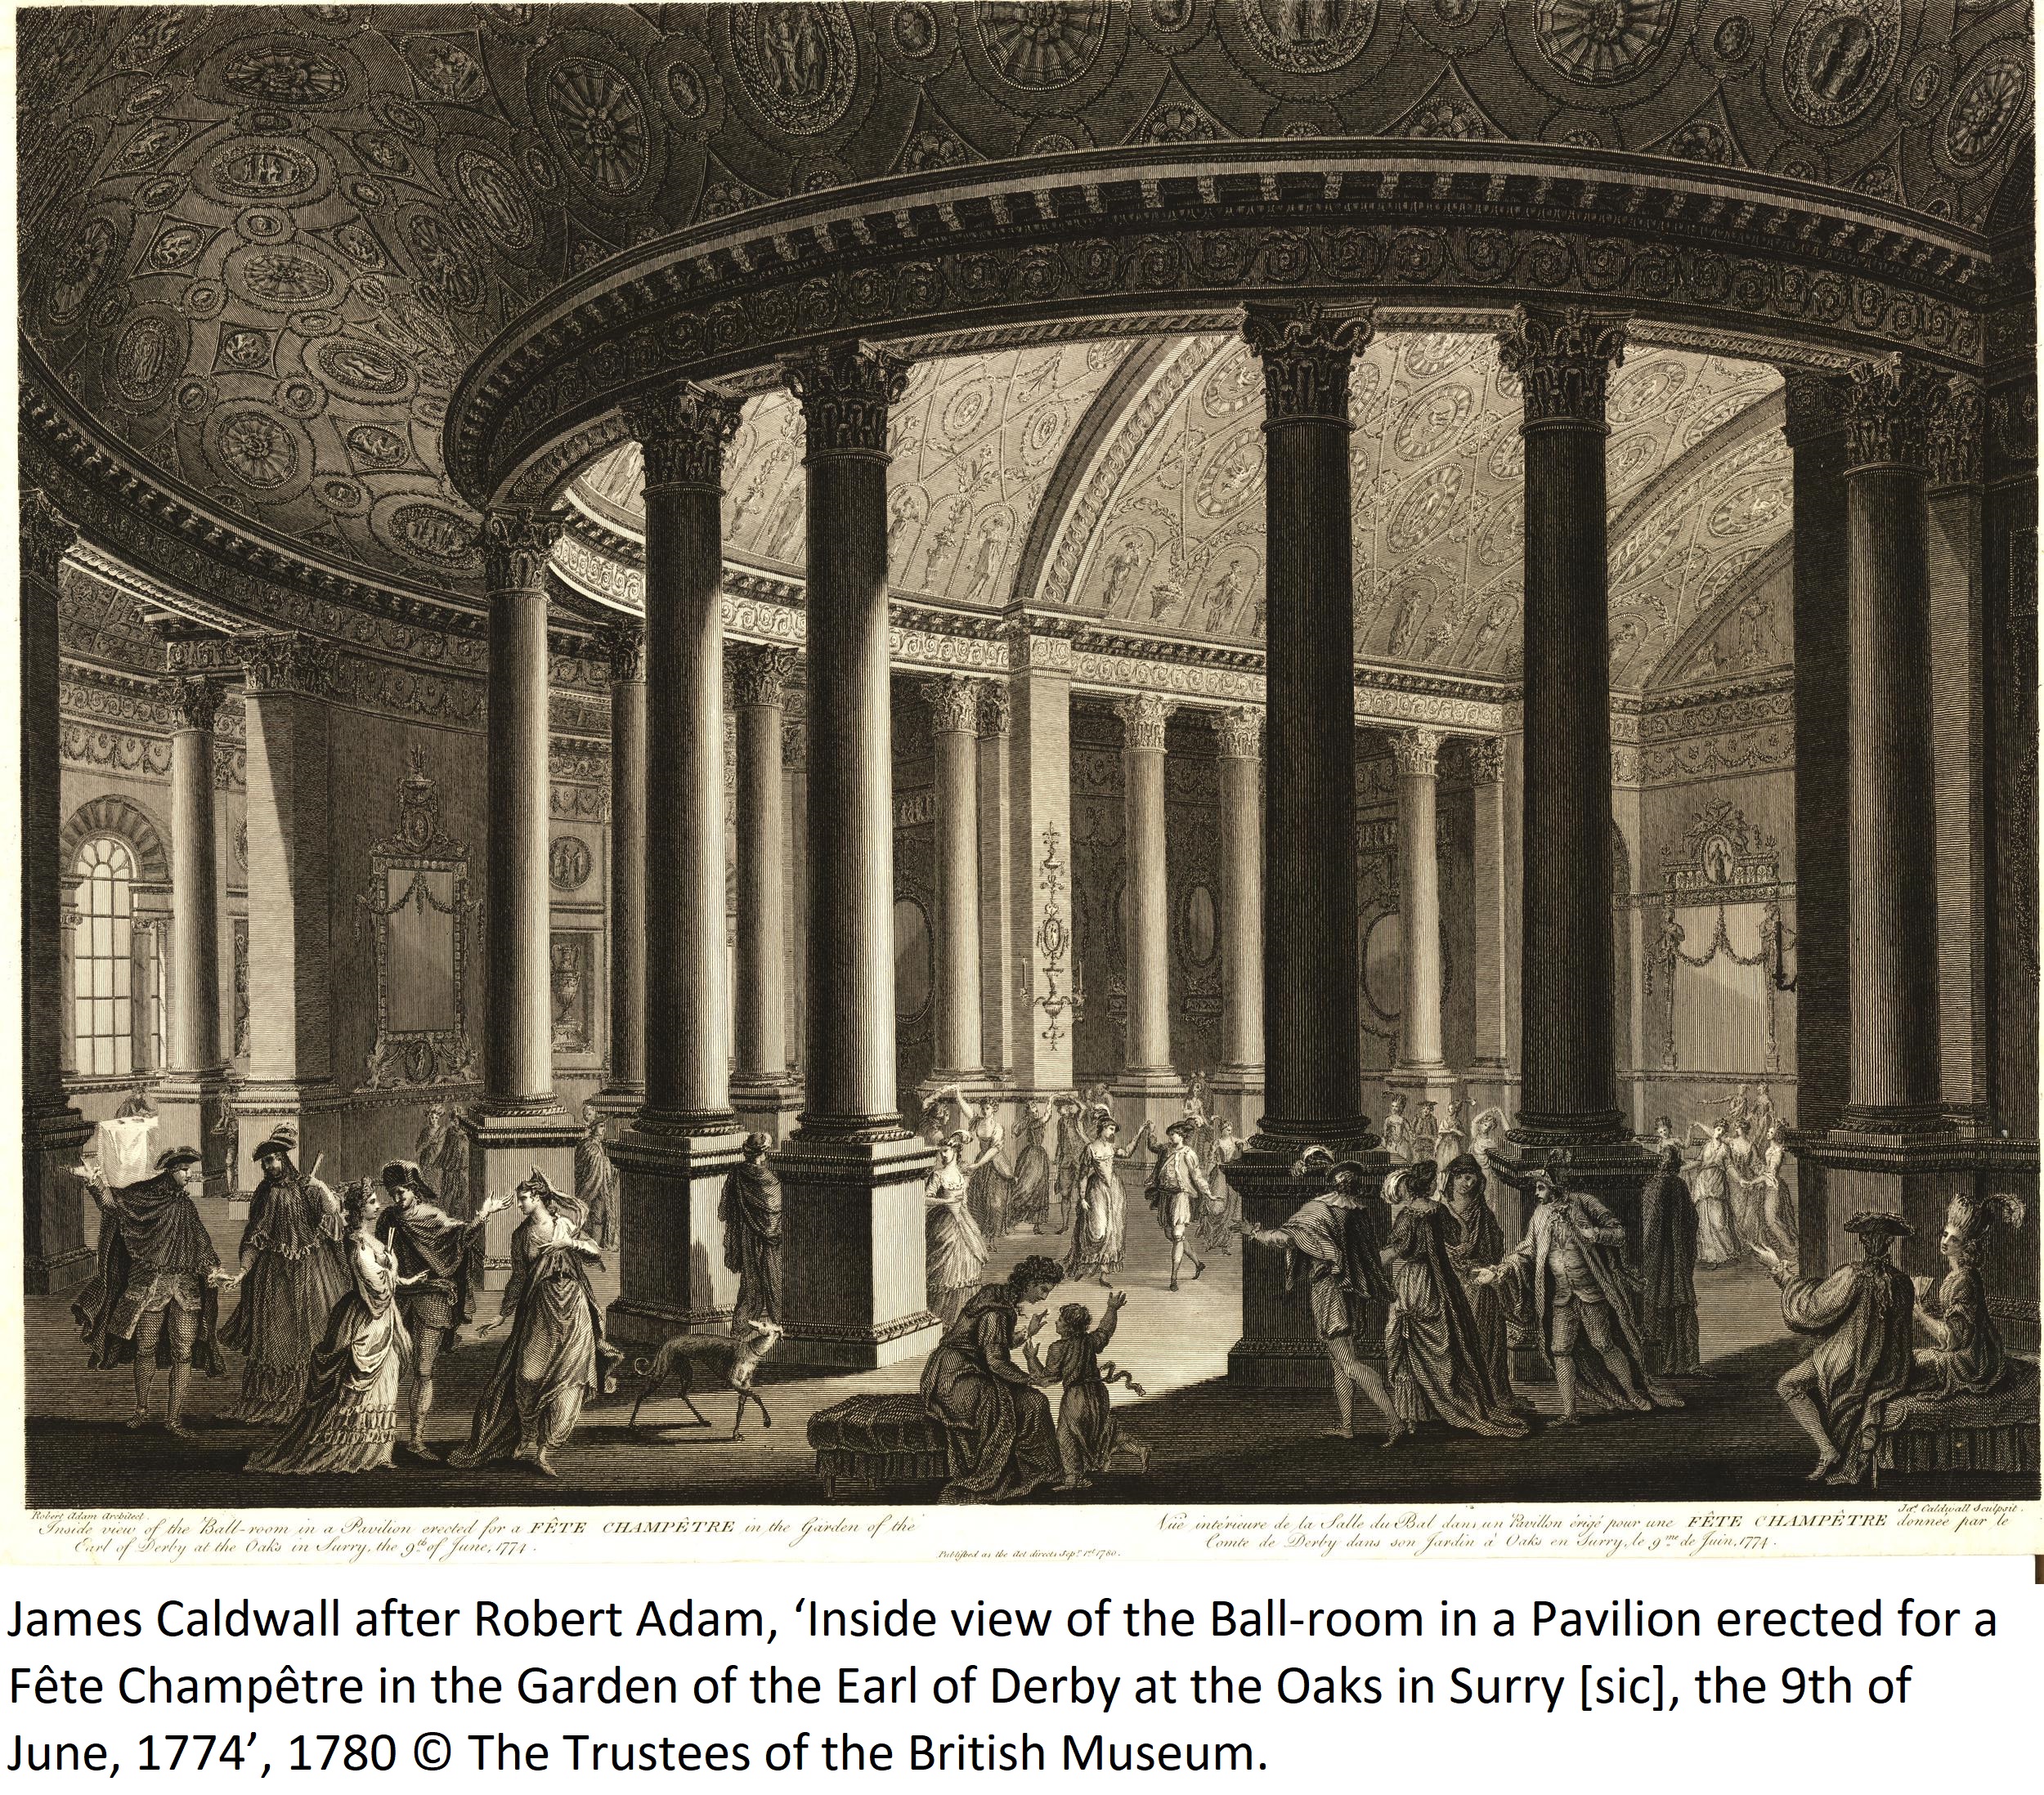 James Caldwall after Robert Adam, ‘Inside view of the Ball-room in a Pavilion erected for a Fête Champêtre in the Garden of the Earl of Derby at the Oaks in Surry [sic], the 9th of June, 1774’, 1780 © The Trustees of the British Museum.